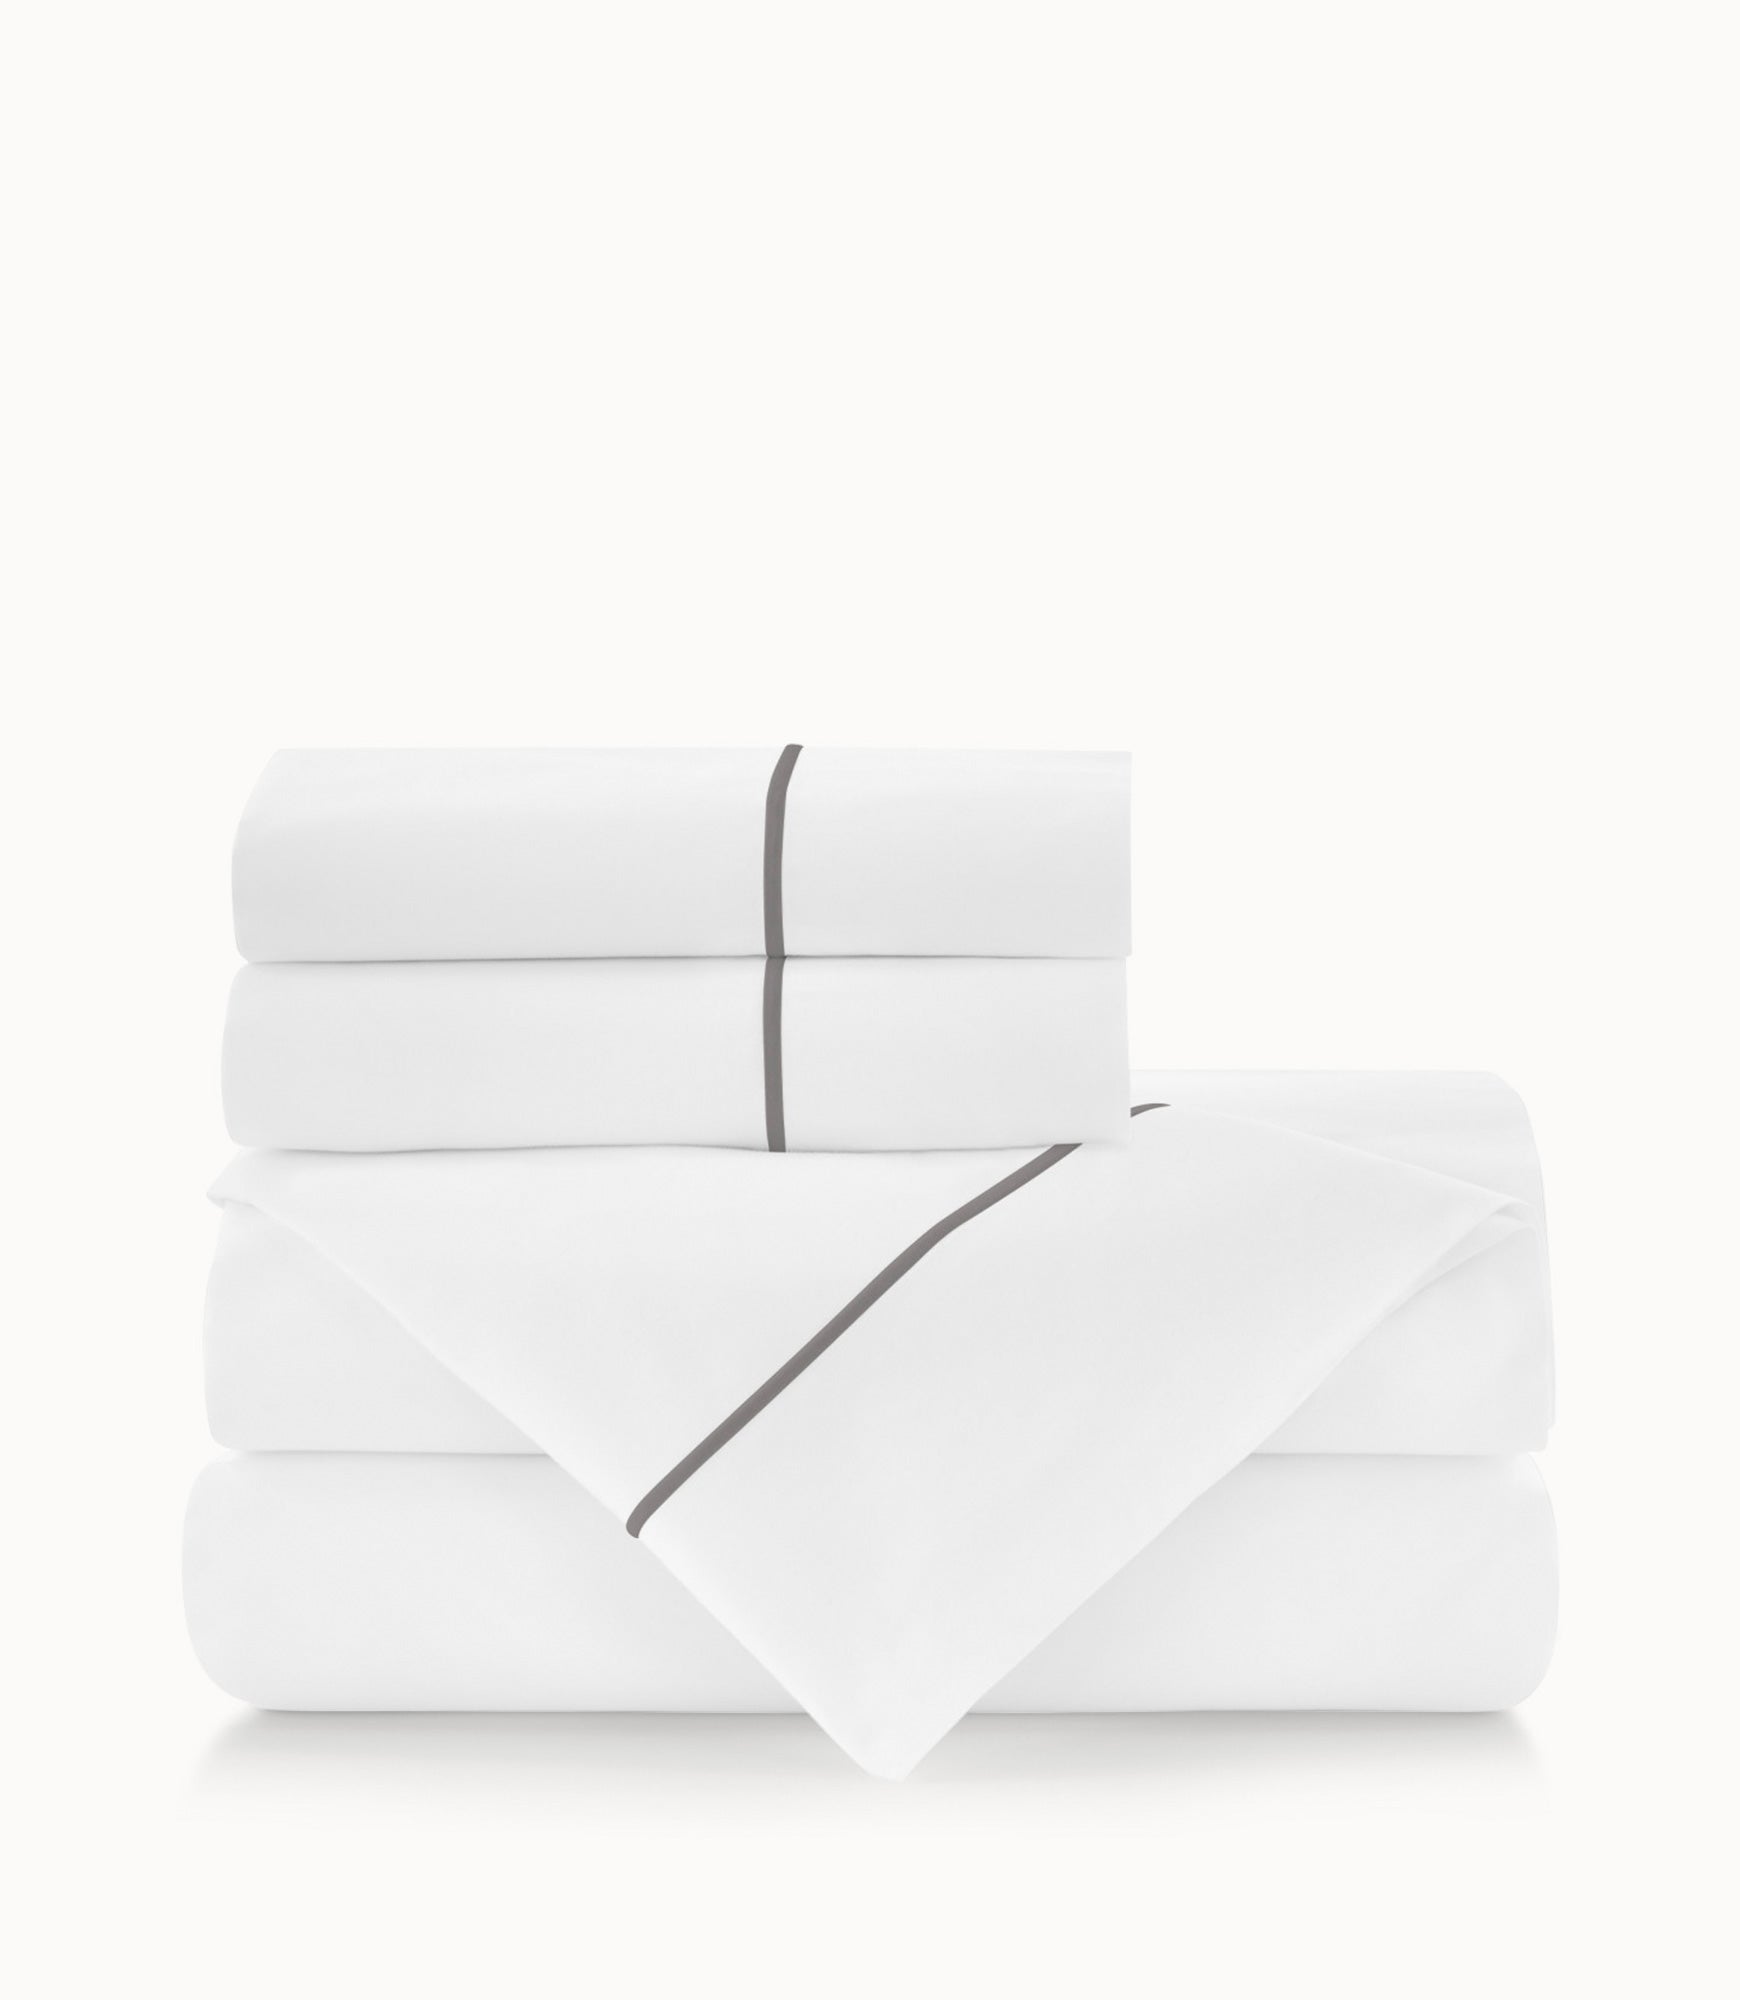 Buying Sheets 101: Don't Get Swindled by Thread Count